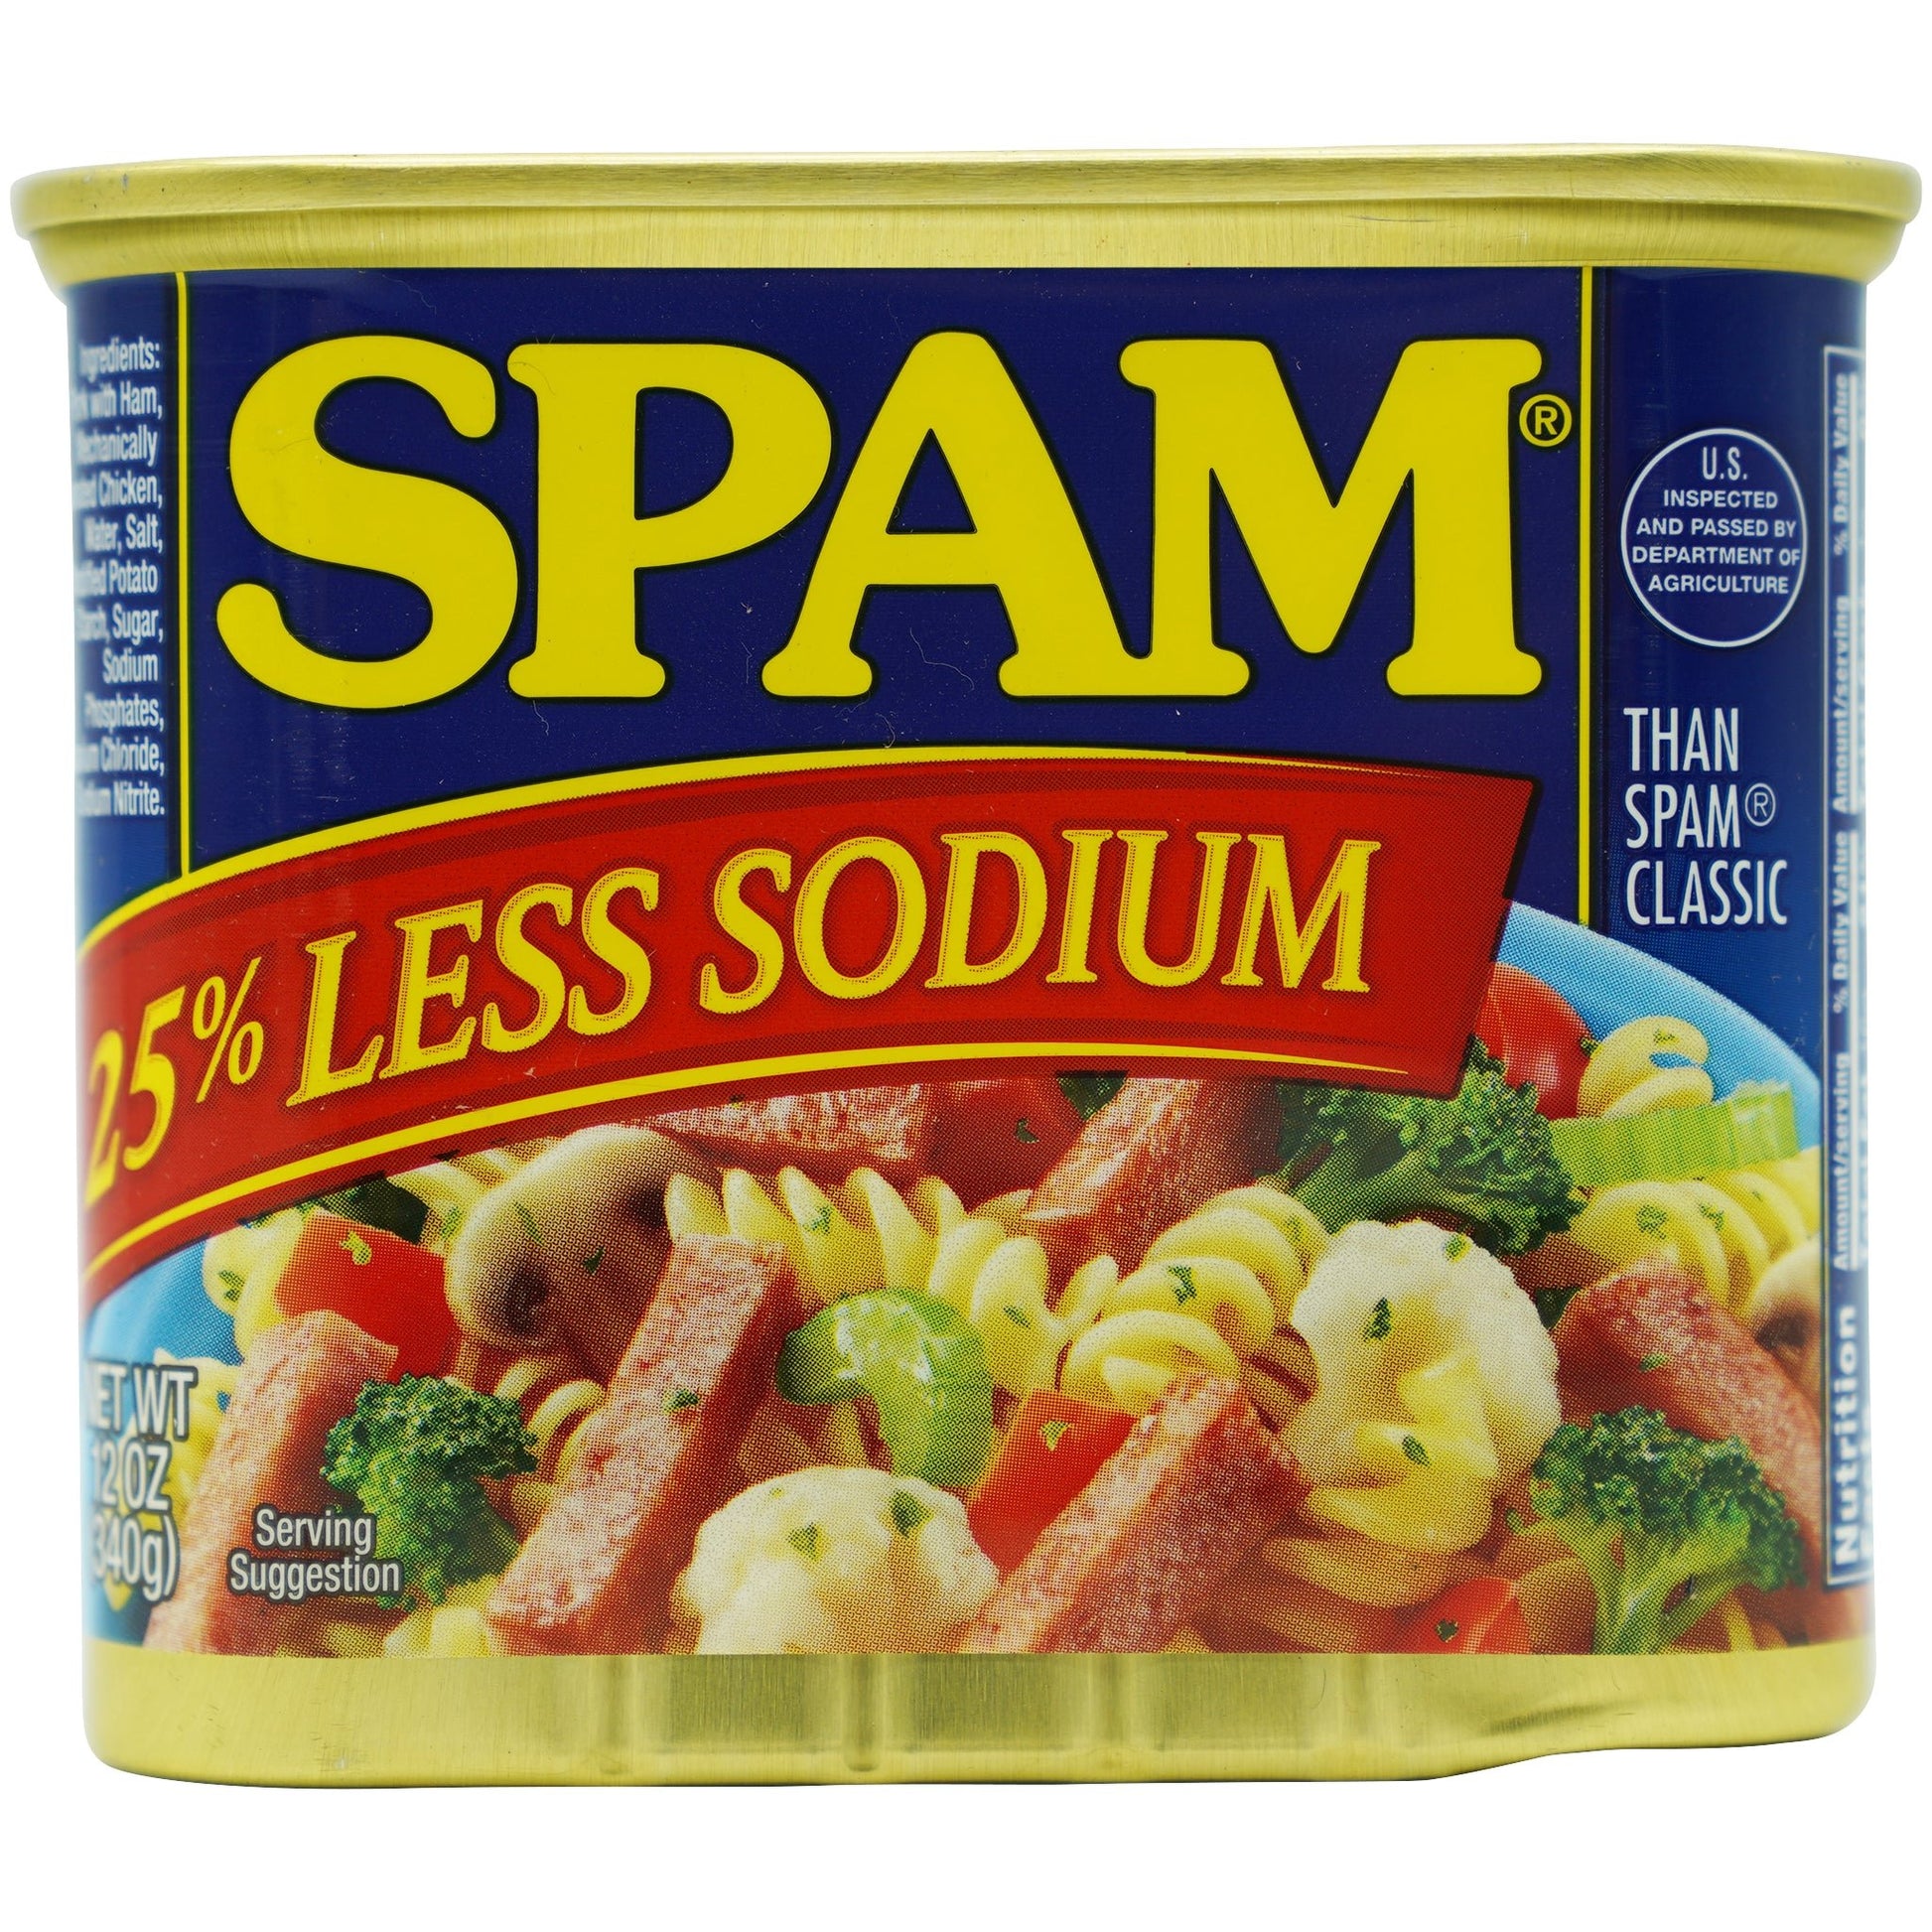 Spam Lunch Meat Less Sodium 12 oz - Tokyo Central - Canned Foods - Spam -